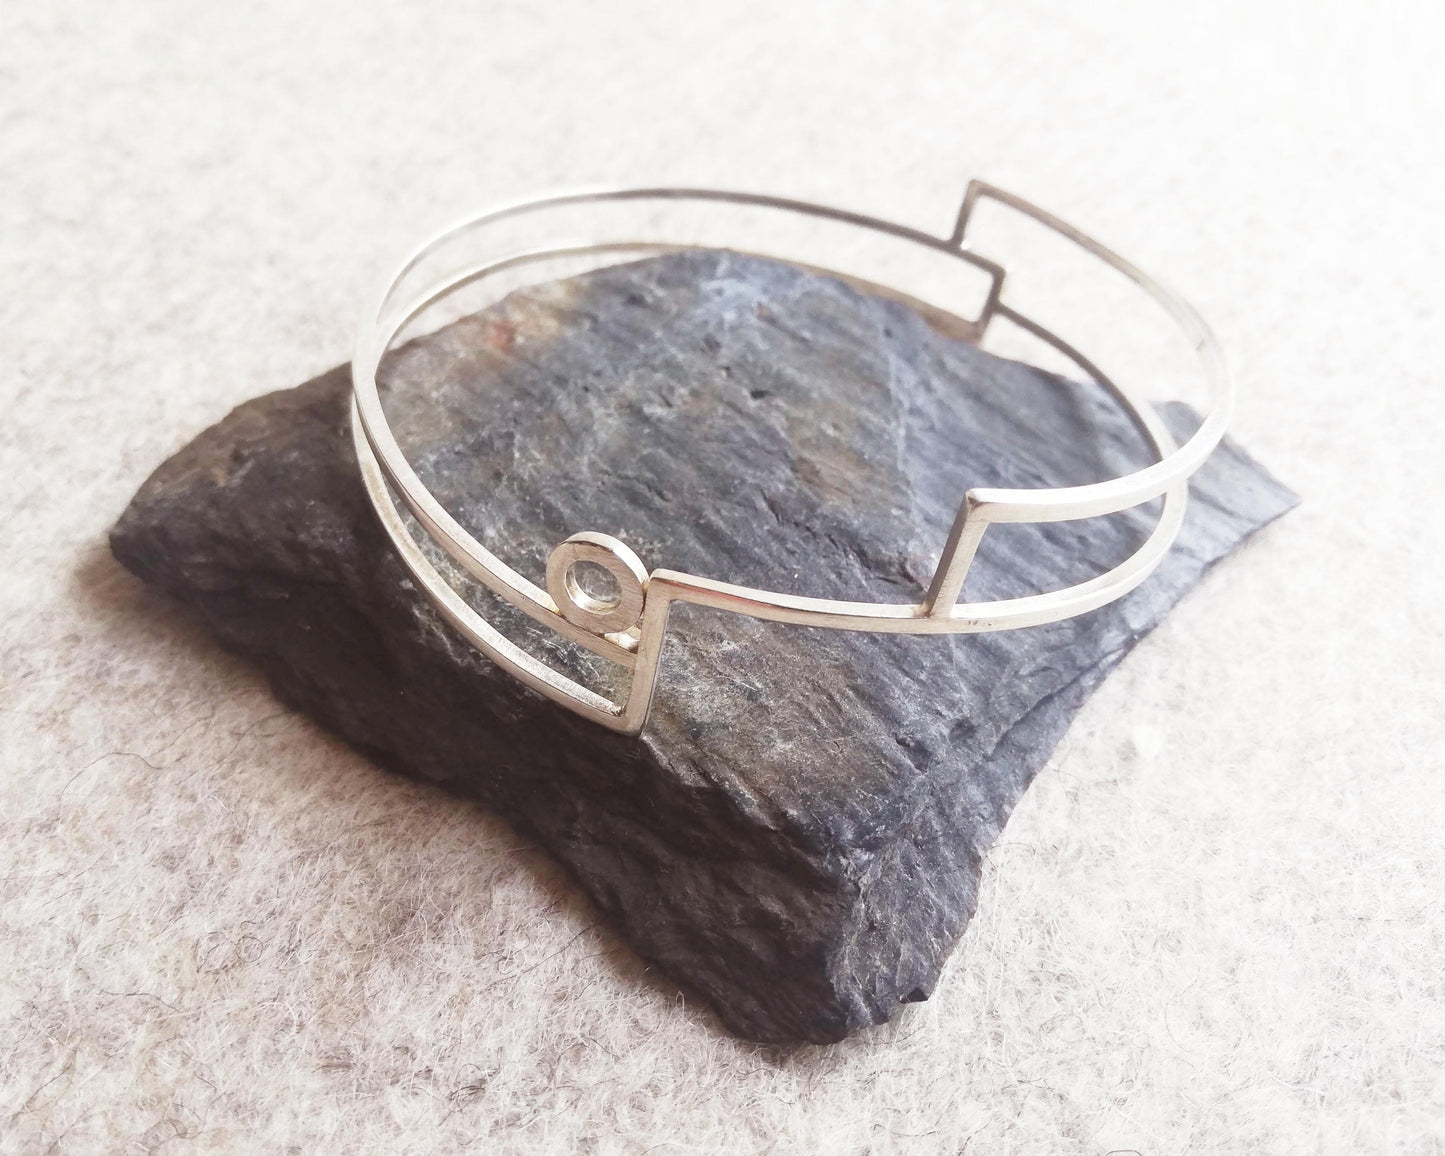 Silver linear stepped bangle with circle detail by Inplico Design. Linear Bangle 2 handmade by Roz Adams